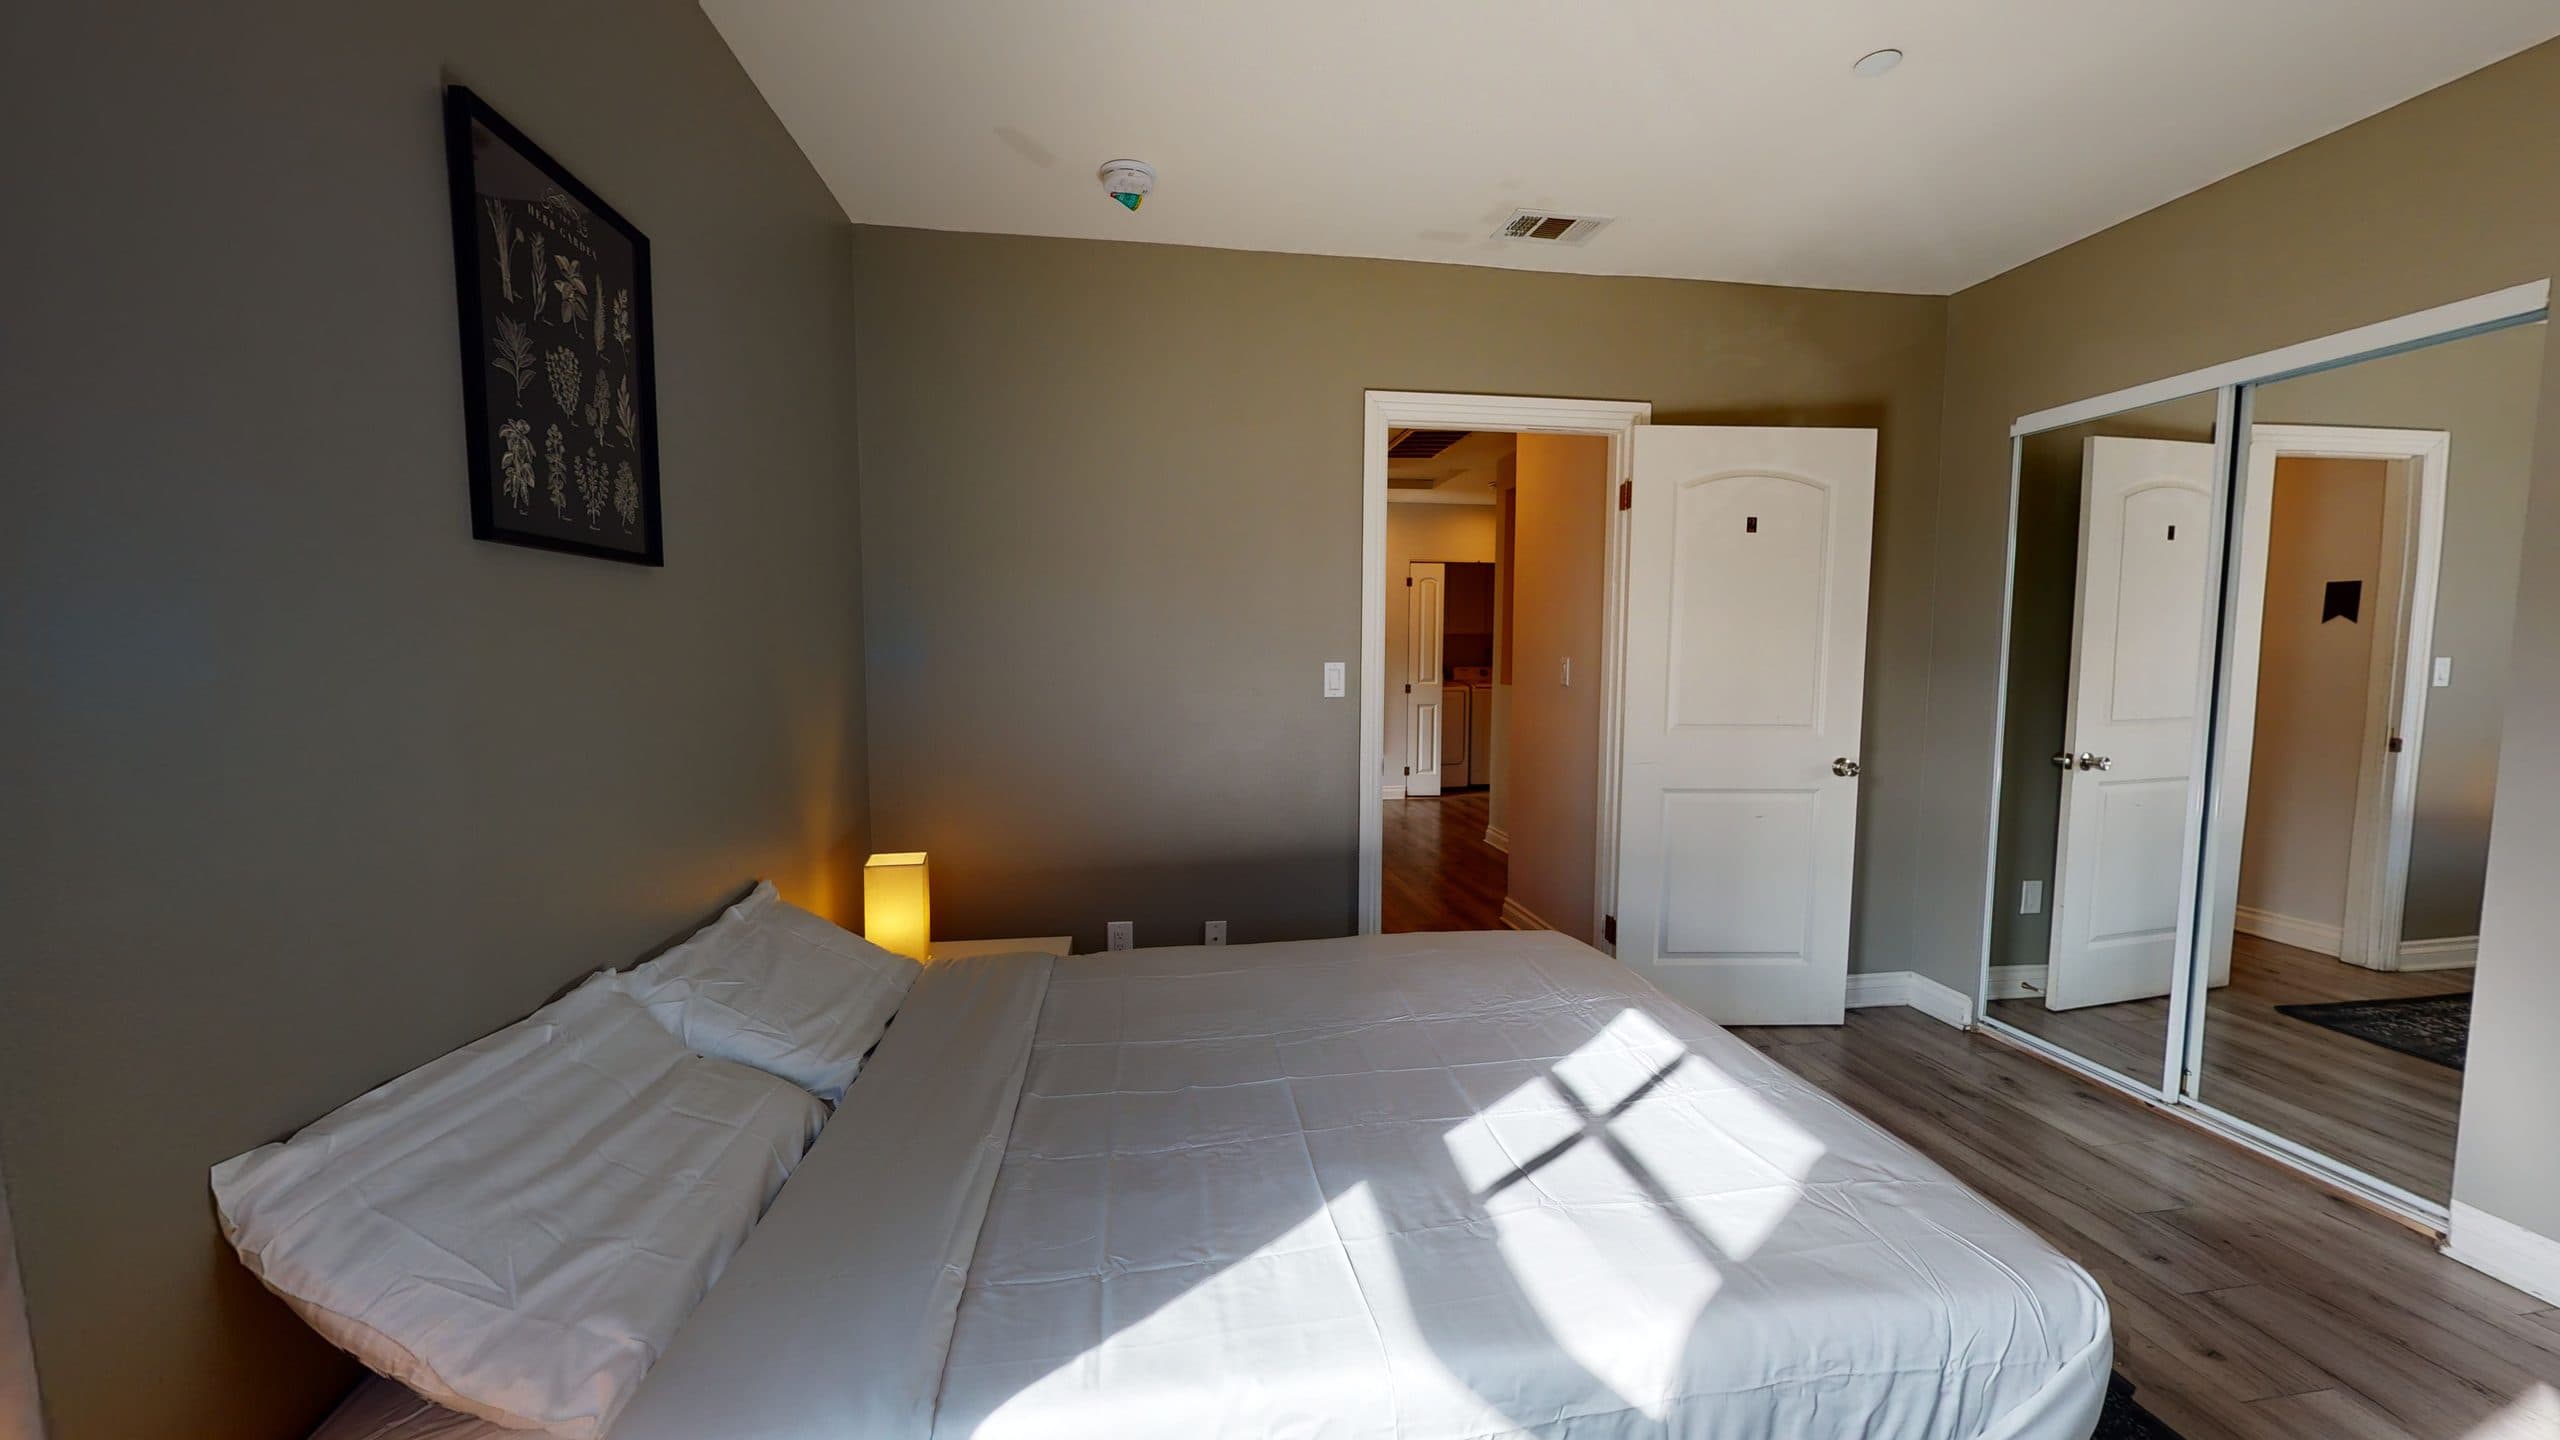 Photo 24 of #2445: Queen Bedroom A (Furnished only) at June Homes